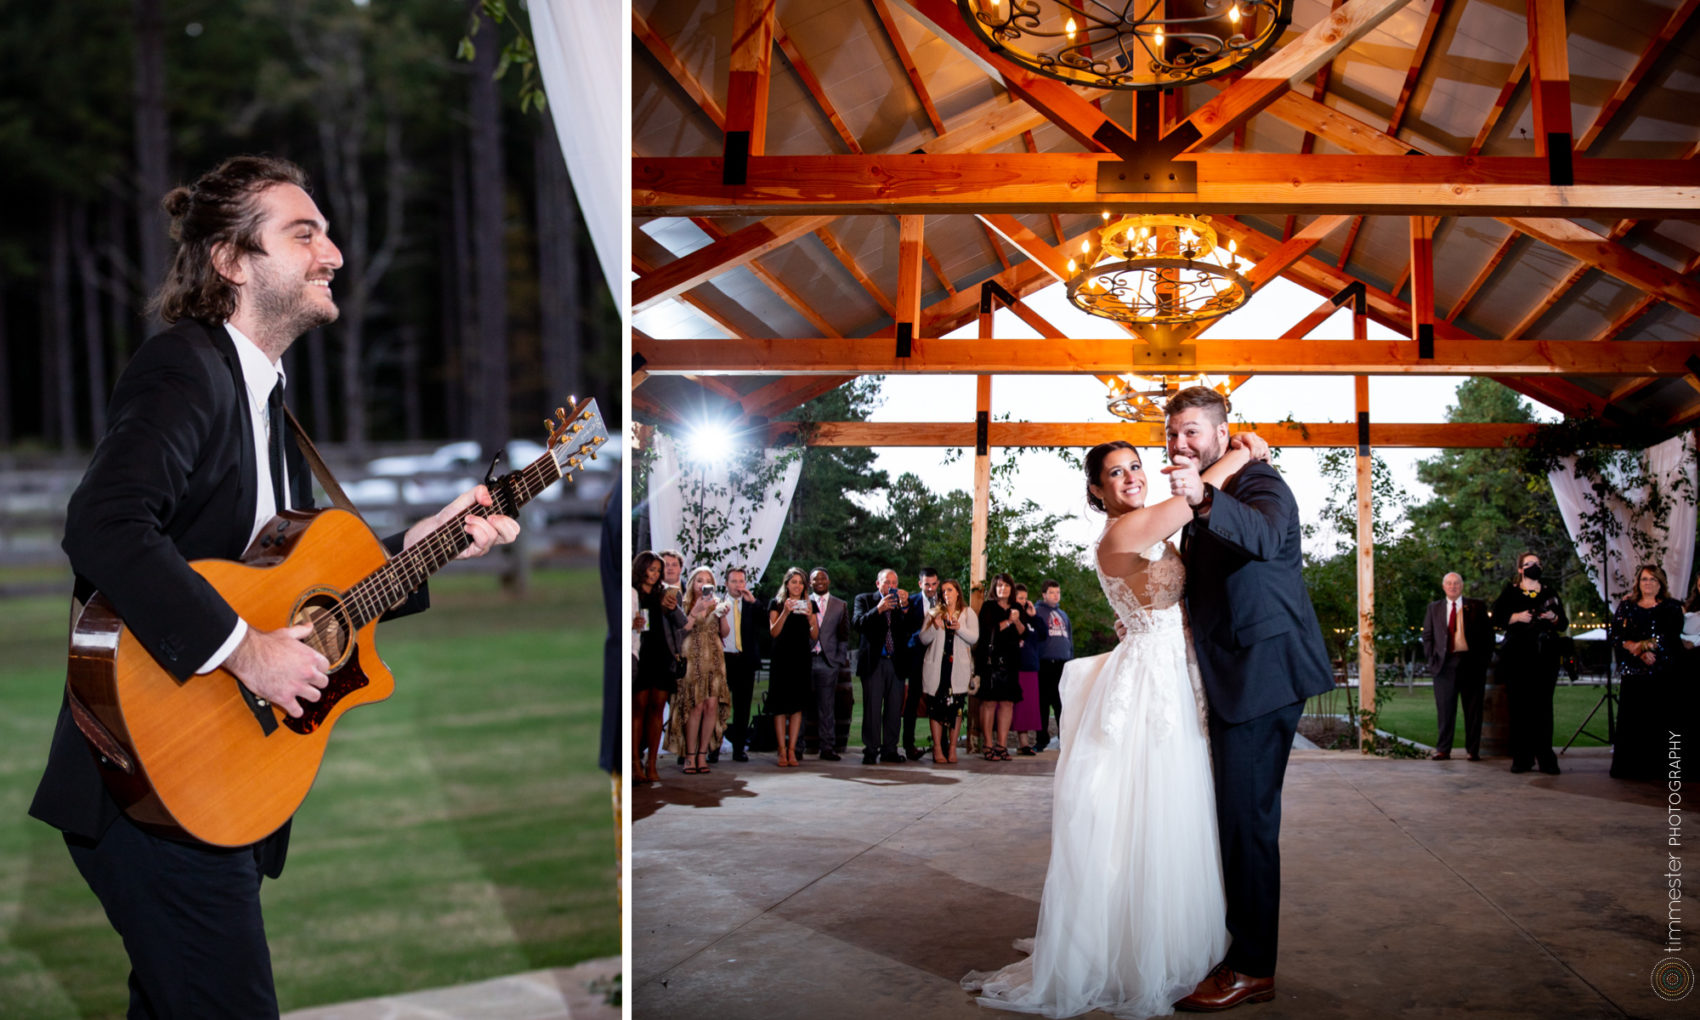 The First Dance and wedding reception for Brianna & Duncan at Dorsett House, Rivers & Bridges